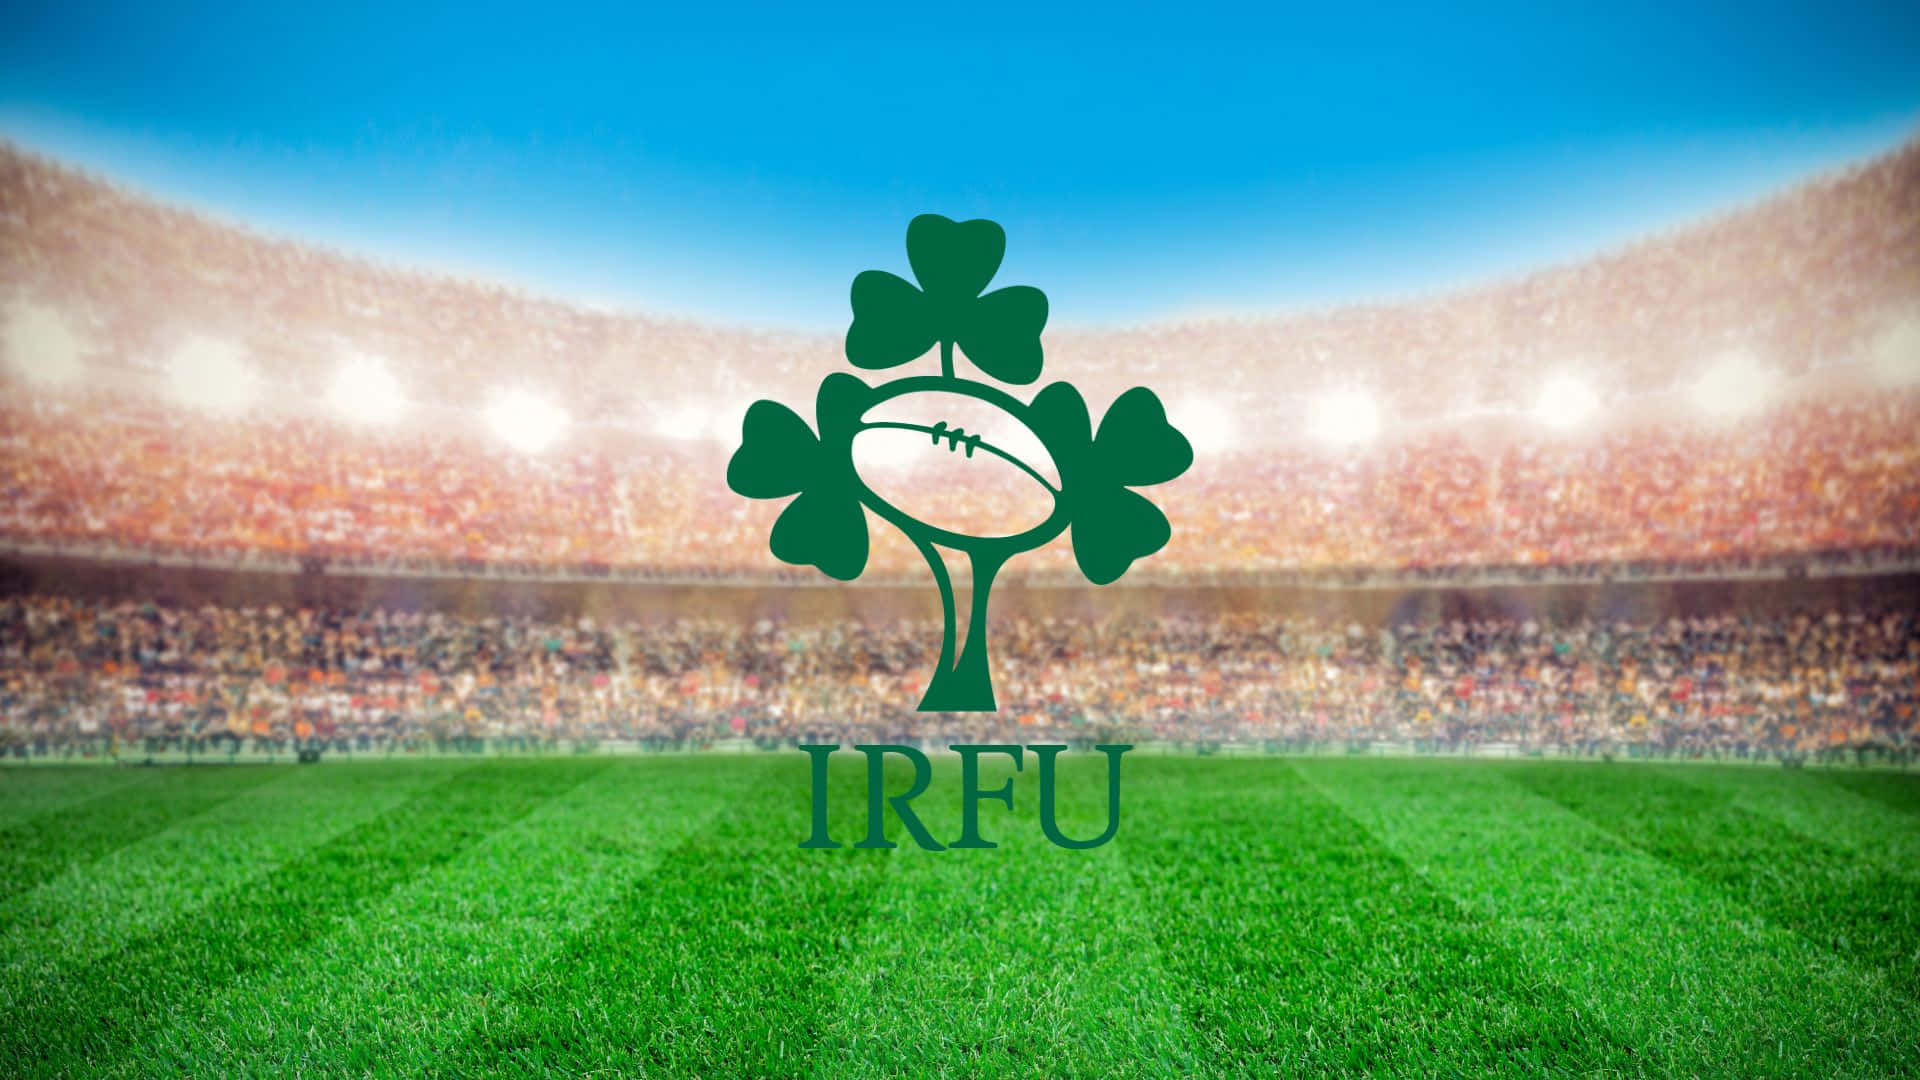 Captivating Moments of Ireland Rugby Team Wallpaper